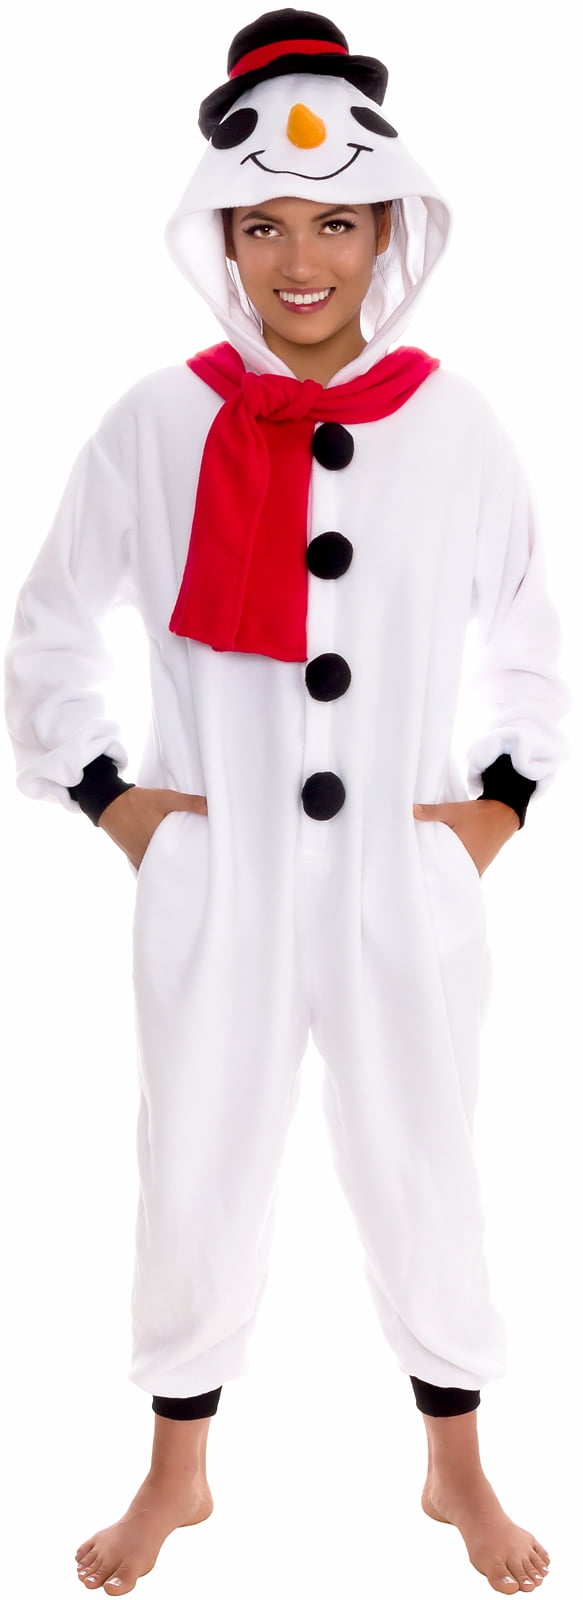 Silver Lilly Unisex Pajamas - One Piece Cosplay Holiday Snowman Costume ...